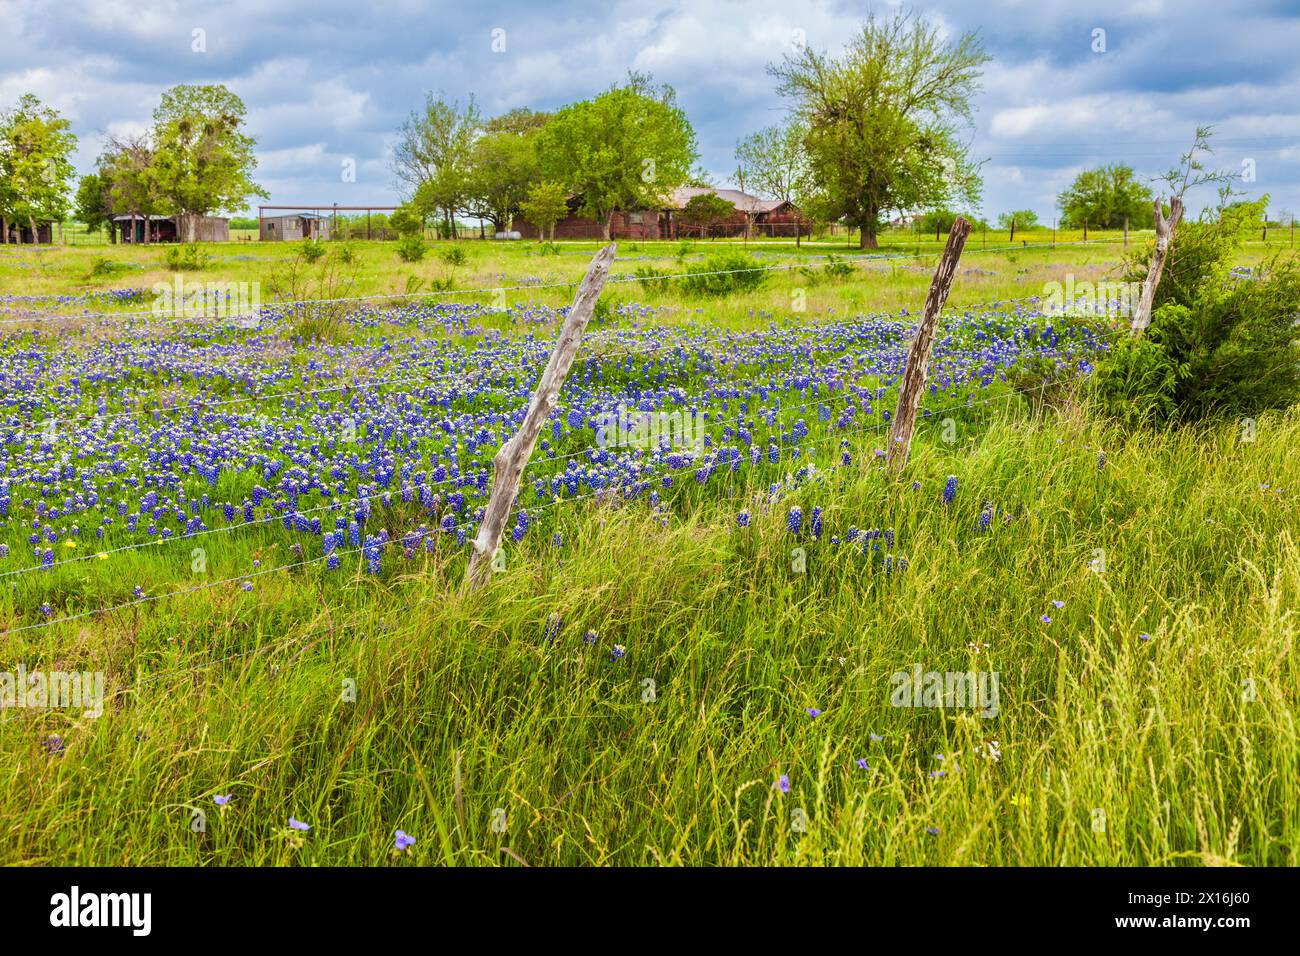 Field of wildflowers and Texas Bluebonnets near Whitehall, Texas. Stock Photo